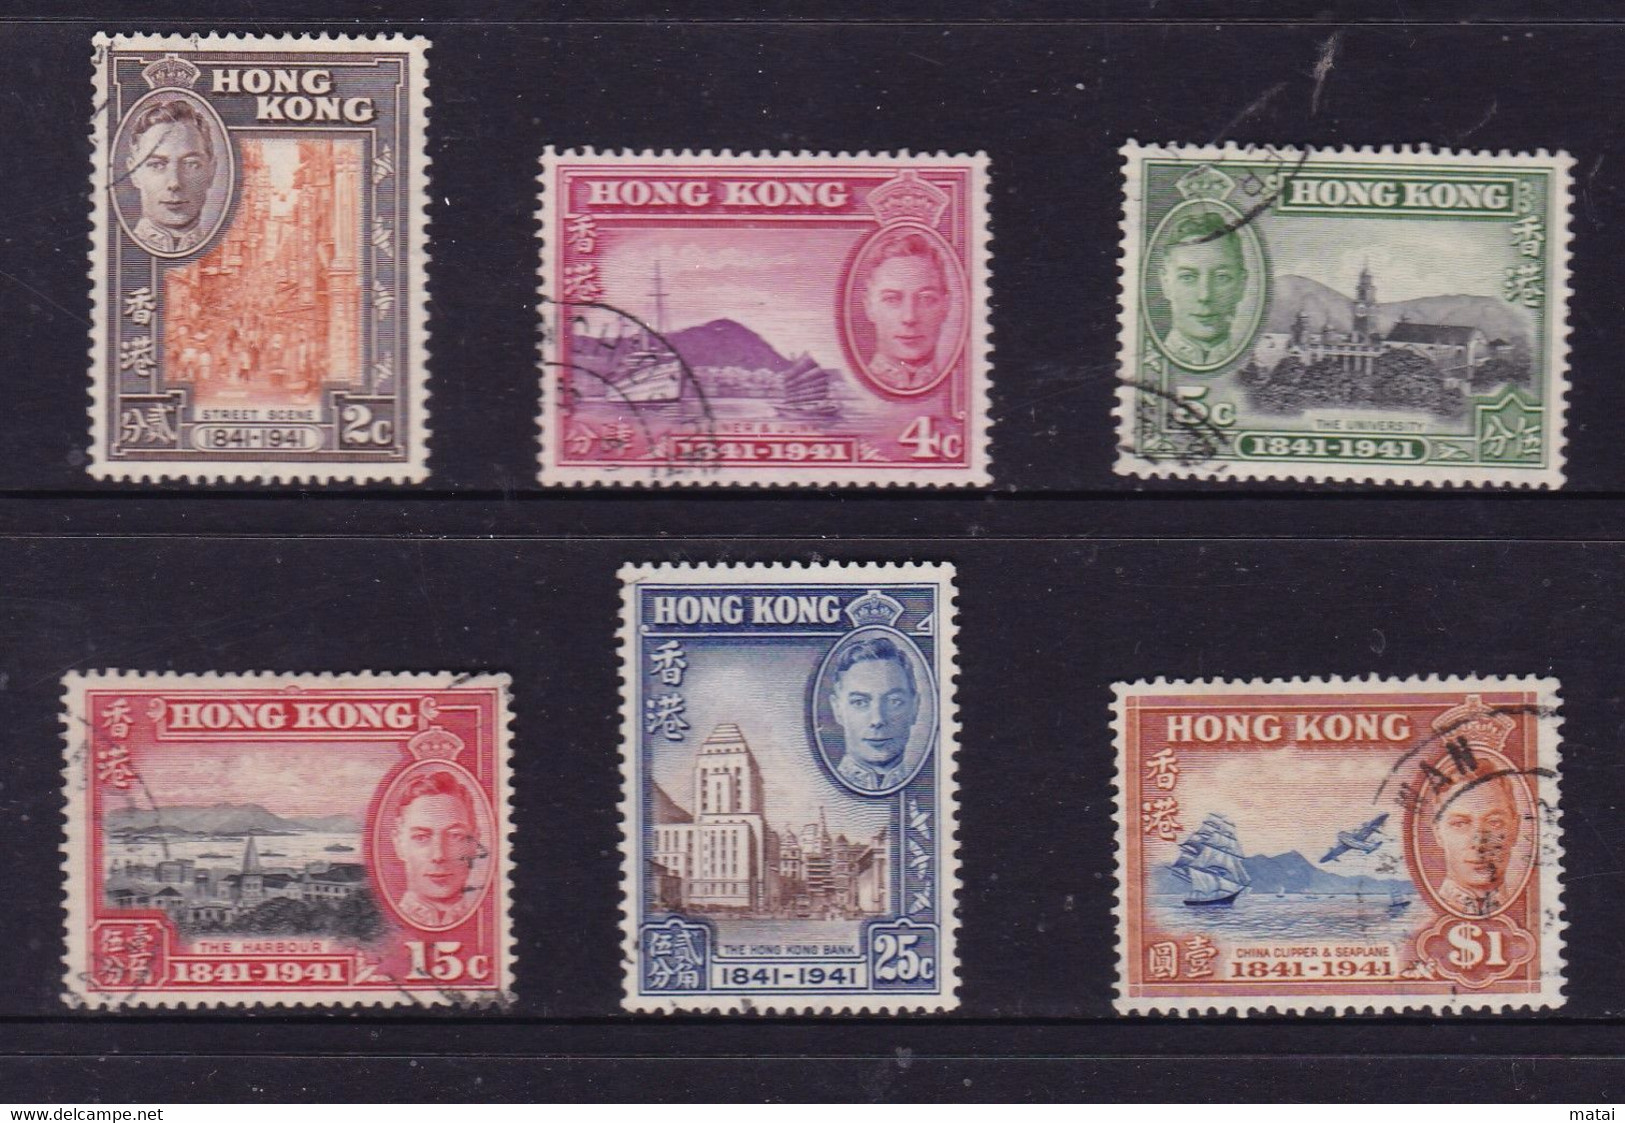 HONG KONG 1941, "Centenary Of British Occupation", Serie Cancelled, Very Light Trace Of Hinge - 1941-45 Japanse Bezetting